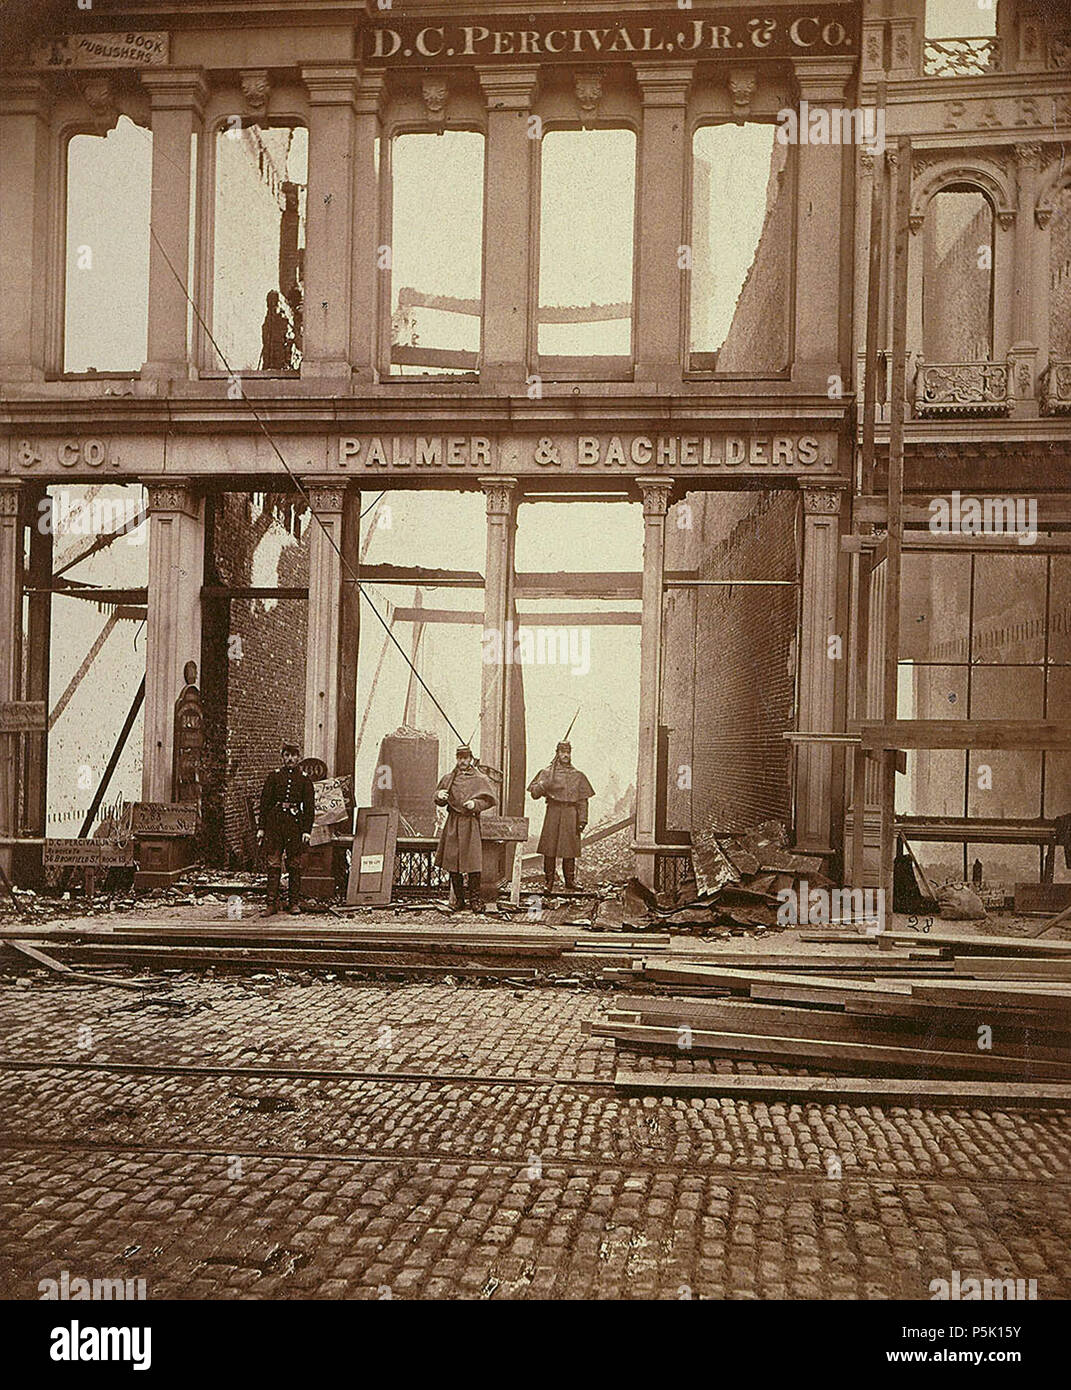 N/A. After the Boston Fire, Washington Street. 1872. James Wallace Black. albumen print on paper mounted on paperboard. sheet and image: 7 x 8 1/2 in. (17.8 x 21.5 cm.). Smithsonian American Art Museum. 1872.   James Wallace Black  (1825–1896)     Alternative names J.W. Black  Description American photographer  Date of birth/death 10 February 1825 5 January 1896  Location of birth/death New Hampshire Cambridge, Massachusetts  Work location English: United States  Authority control  : Q289479 VIAF:38169833 ISNI:0000 0000 6705 9024 ULAN:500006013 LCCN:n78012819 GND:133575594 WorldCat 30 1872 Aft Stock Photo